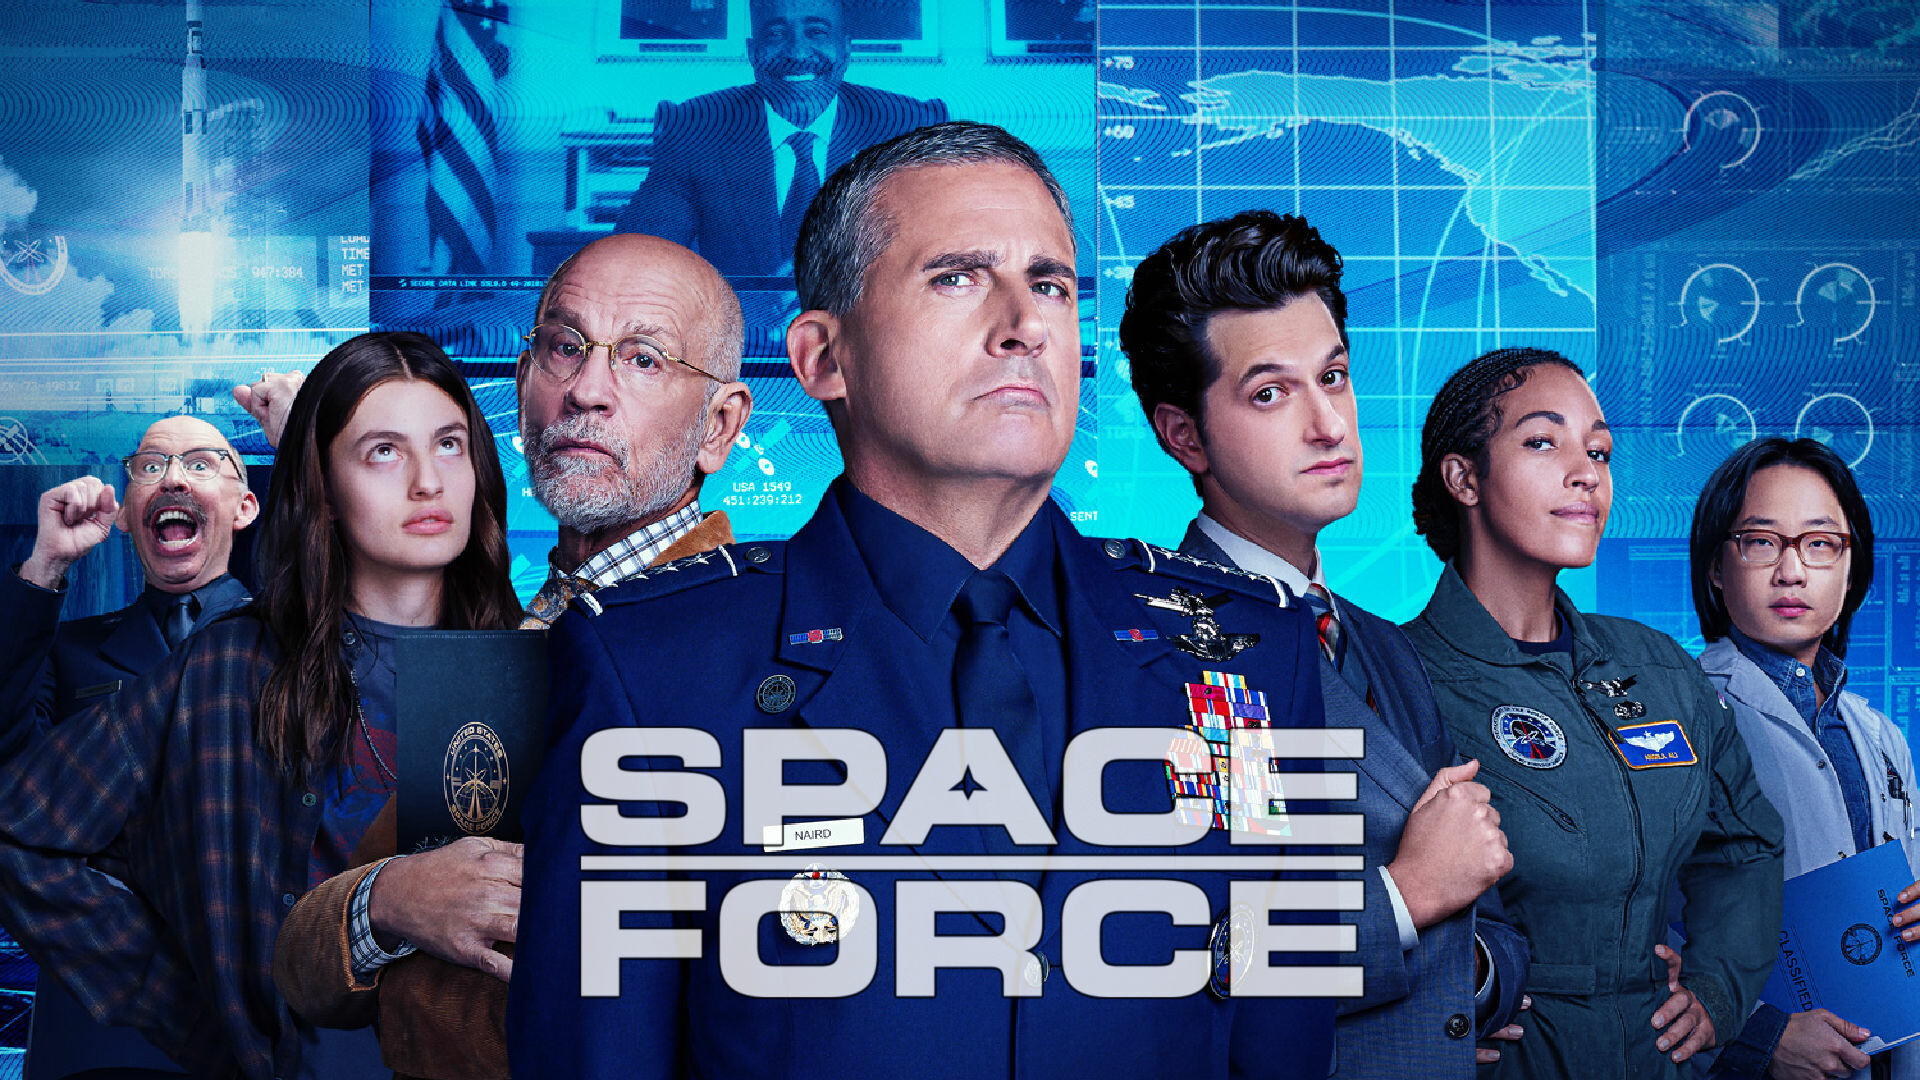 Space Force, TV Series, What's going on, Mystery, 1920x1080 Full HD Desktop